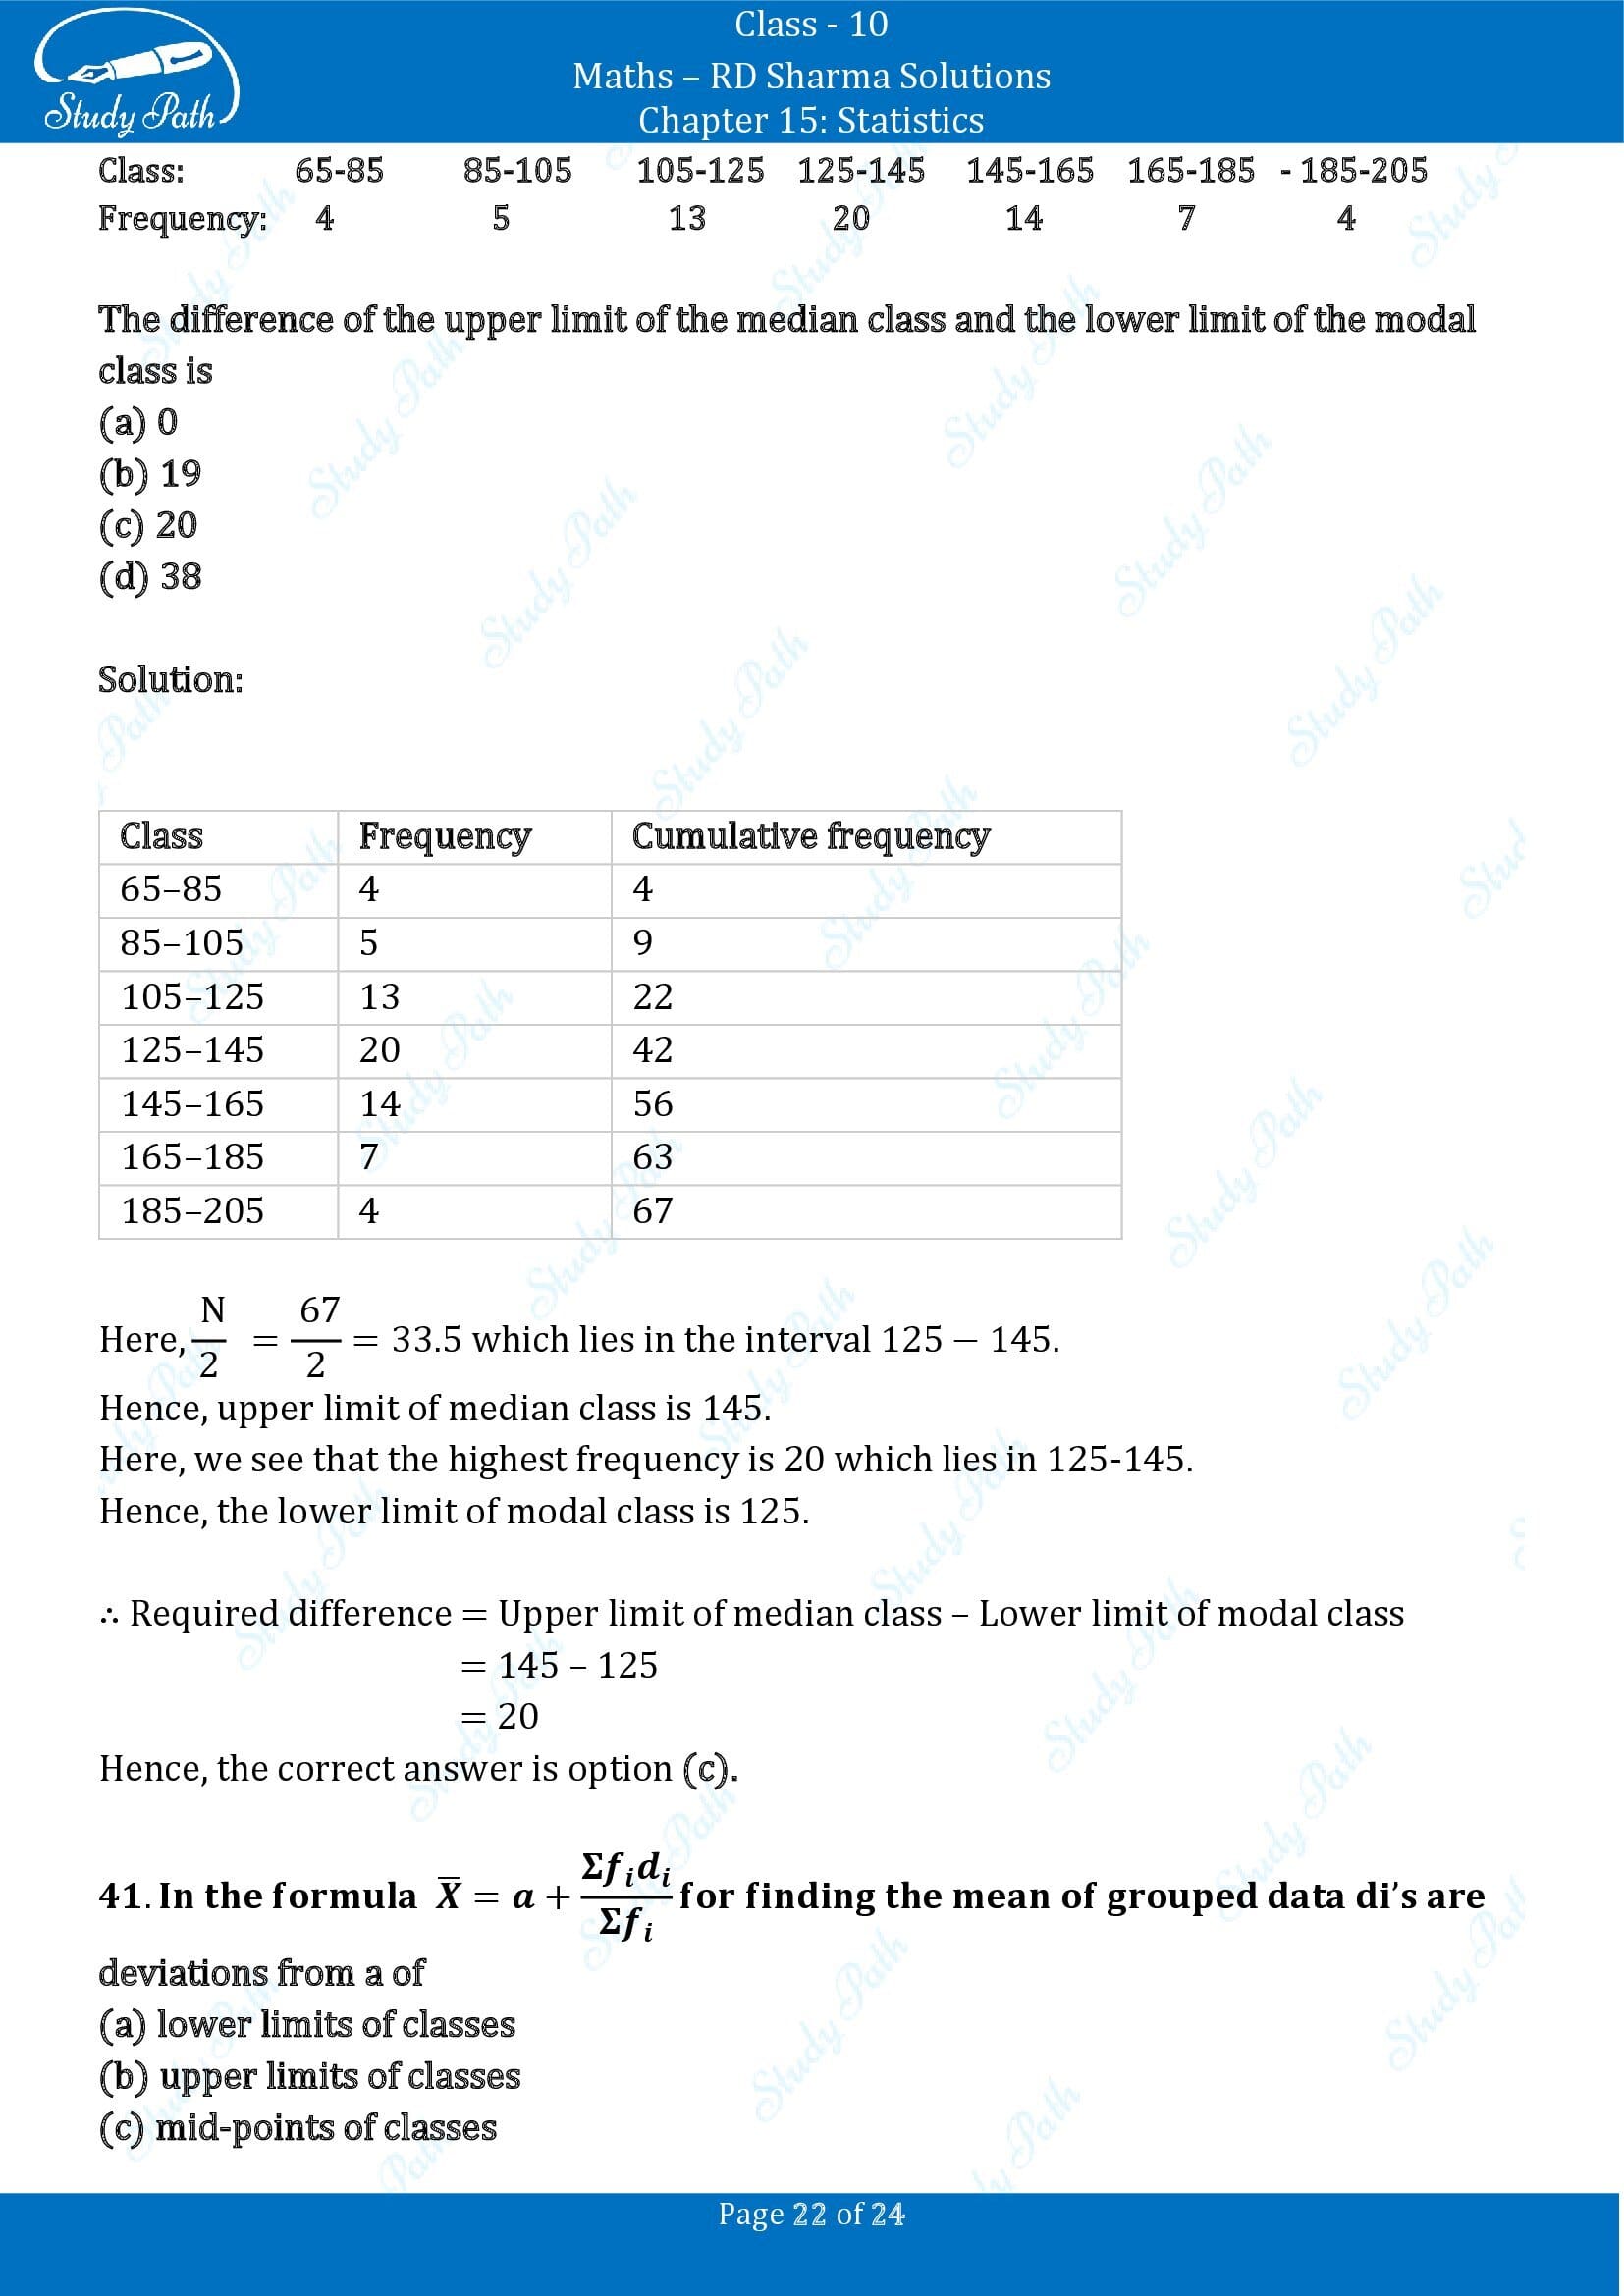 RD Sharma Solutions Class 10 Chapter 15 Statistics Multiple Choice Question MCQs 00022